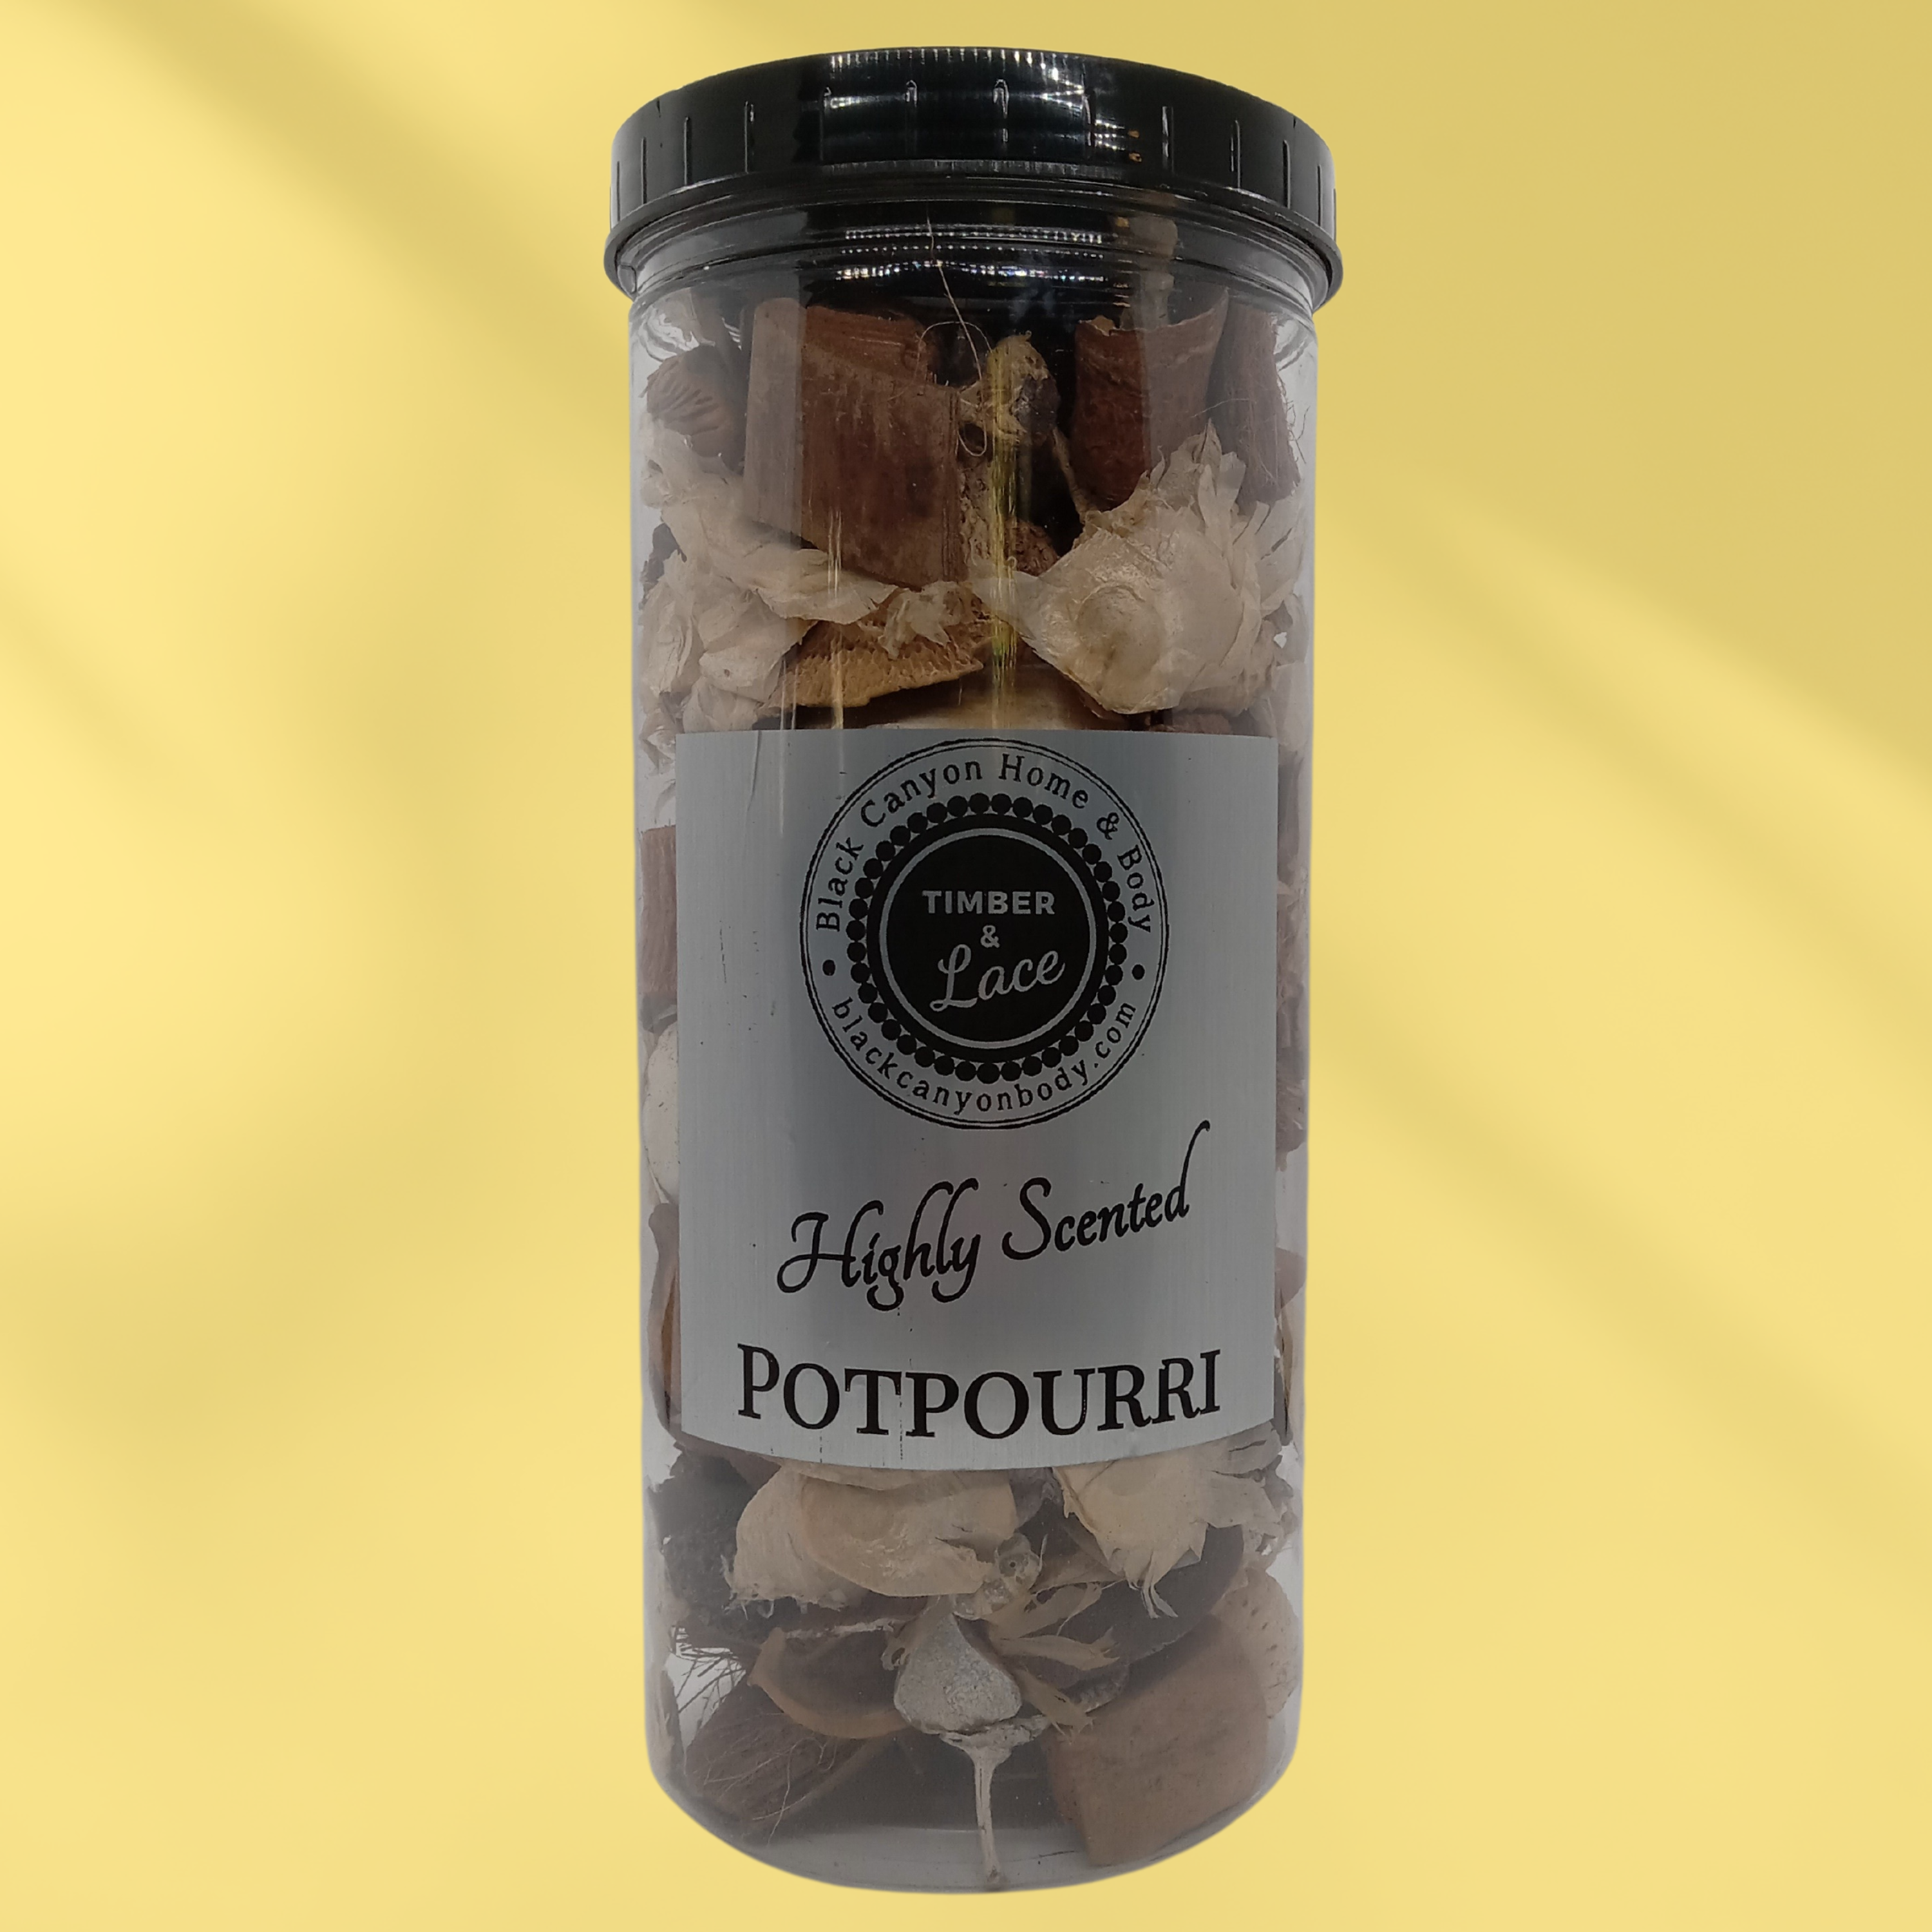 Timber & Lace Banana Nut Bread Scented Potpourri